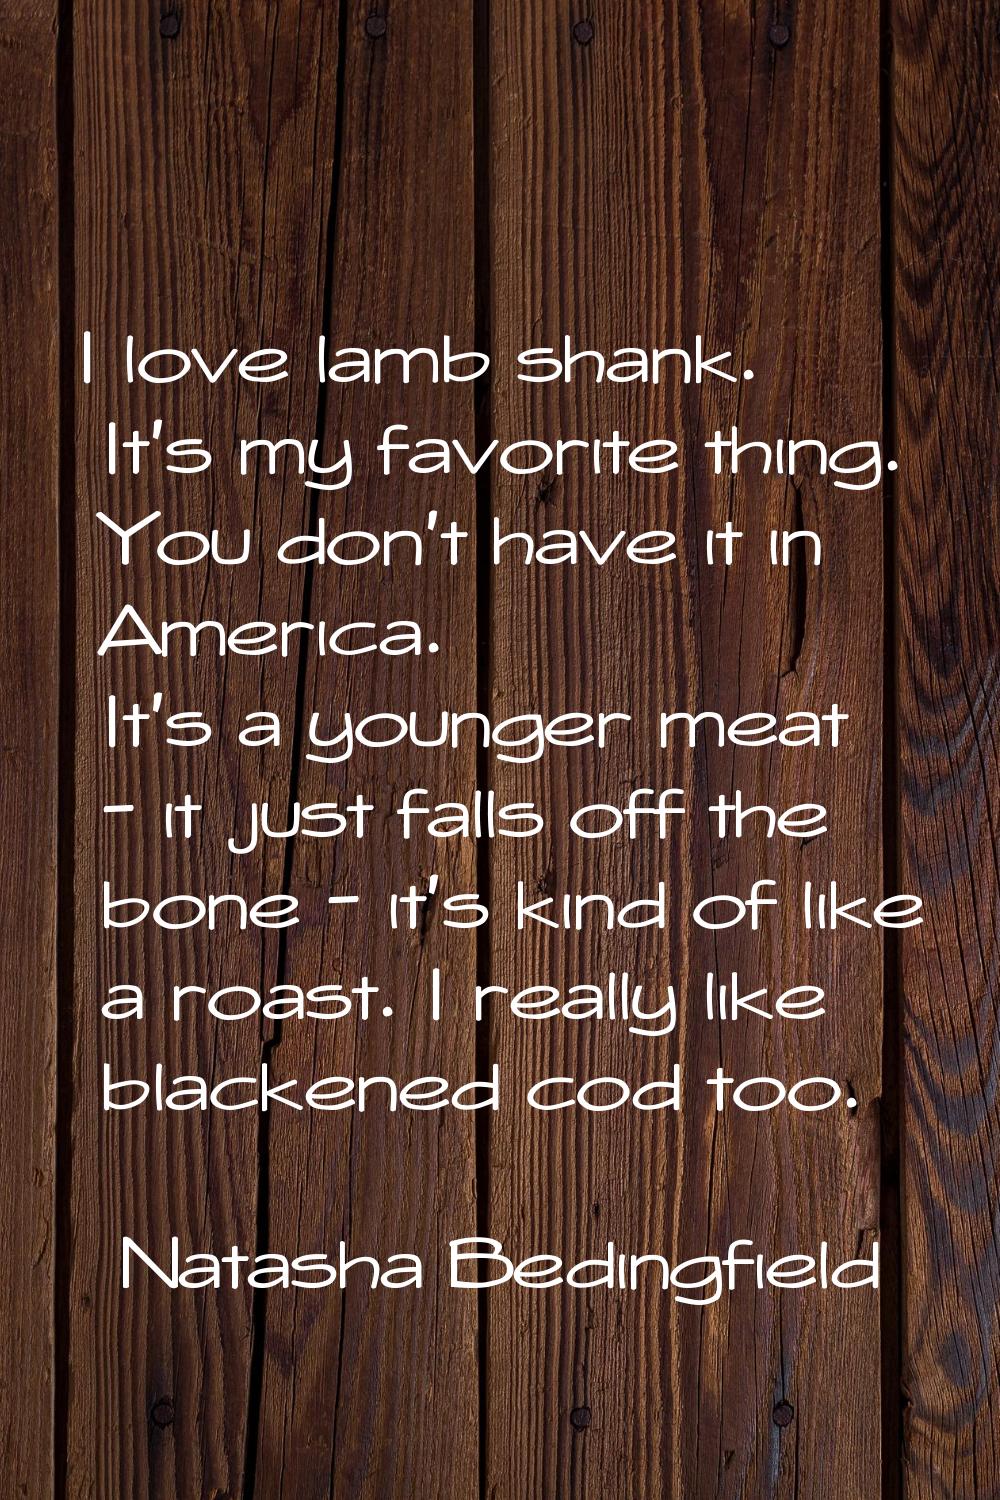 I love lamb shank. It's my favorite thing. You don't have it in America. It's a younger meat - it j